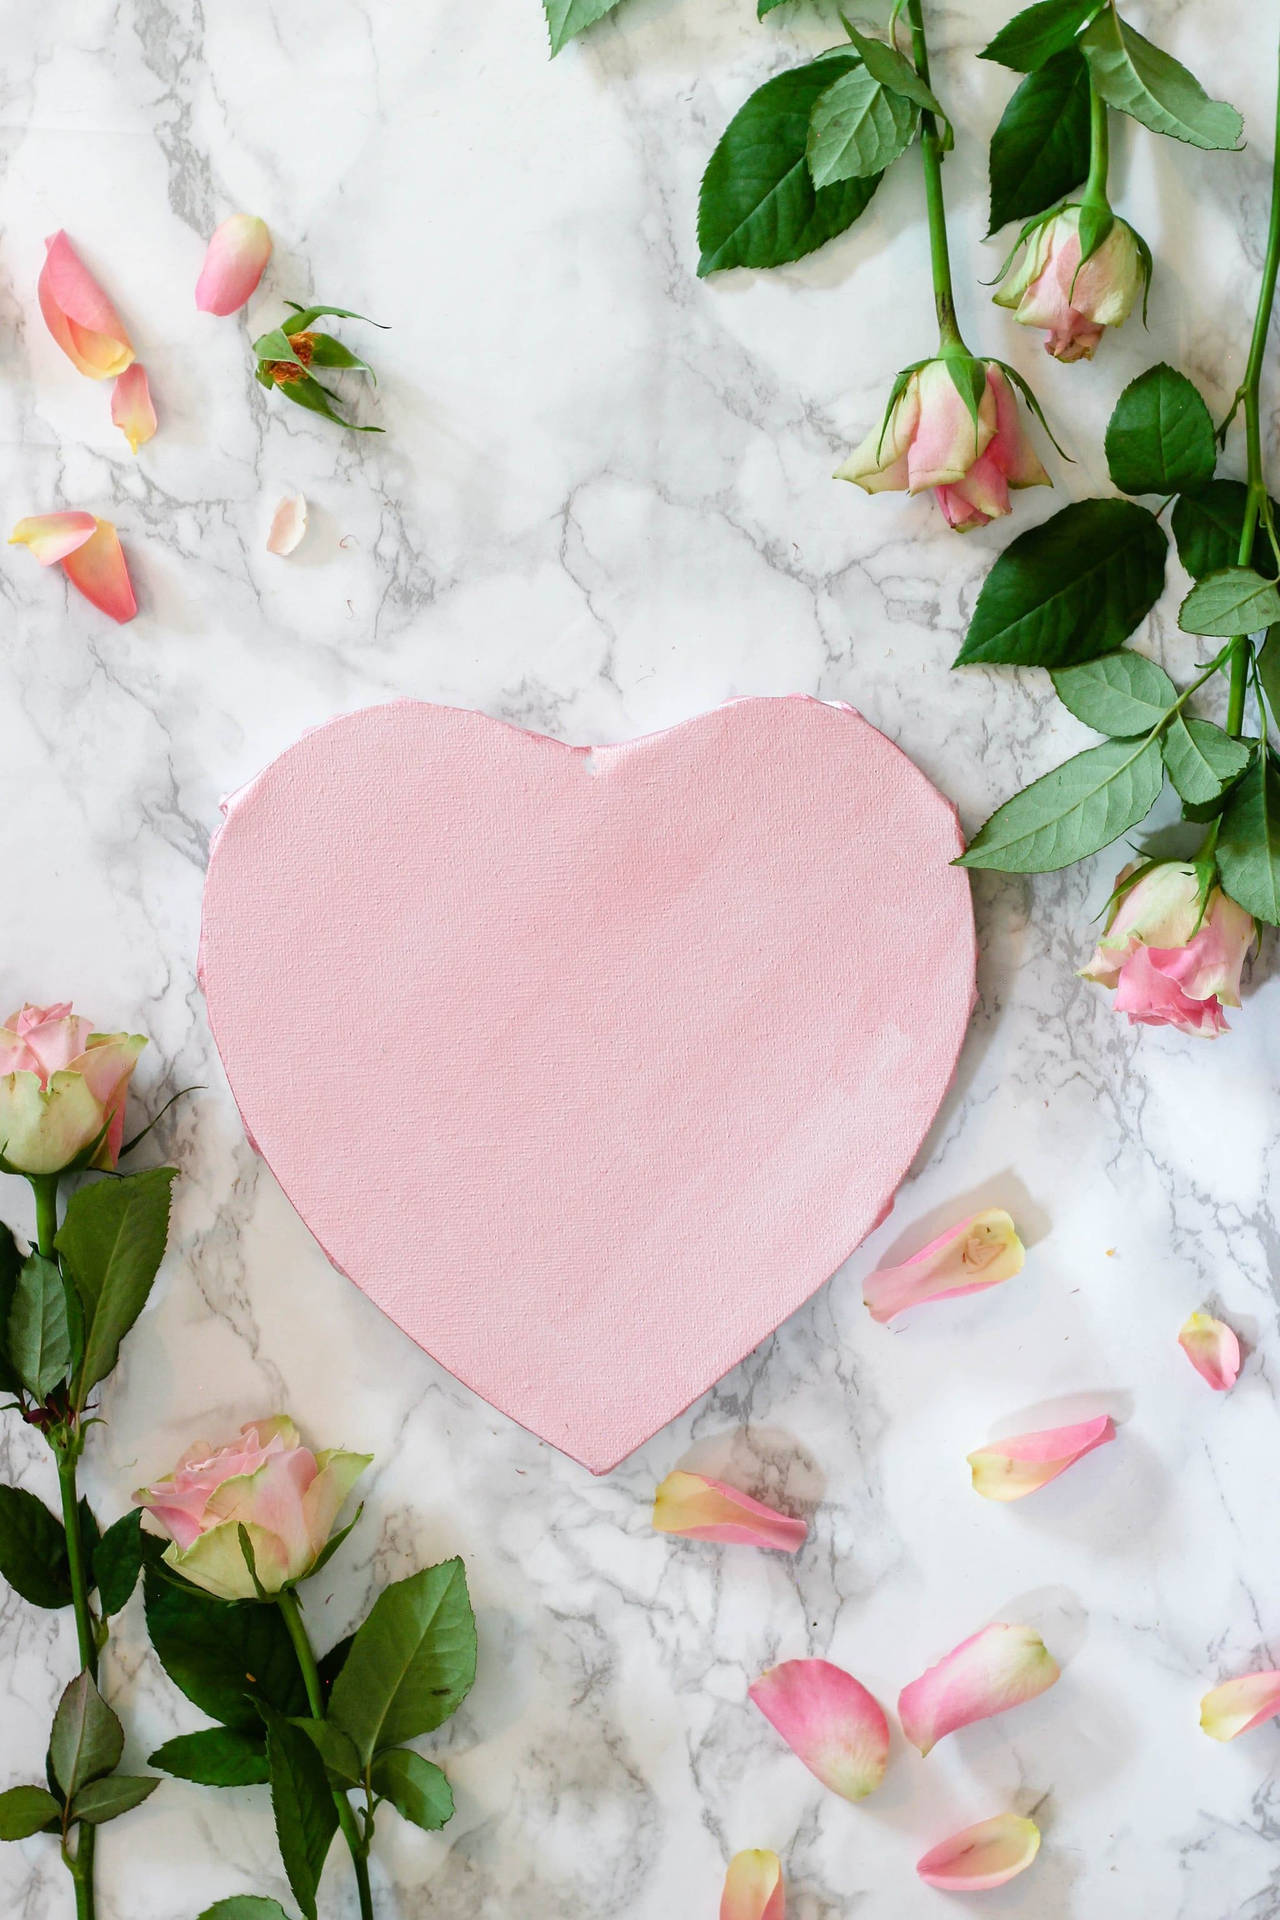 Pastel Pink Heart Plate With Roses Background